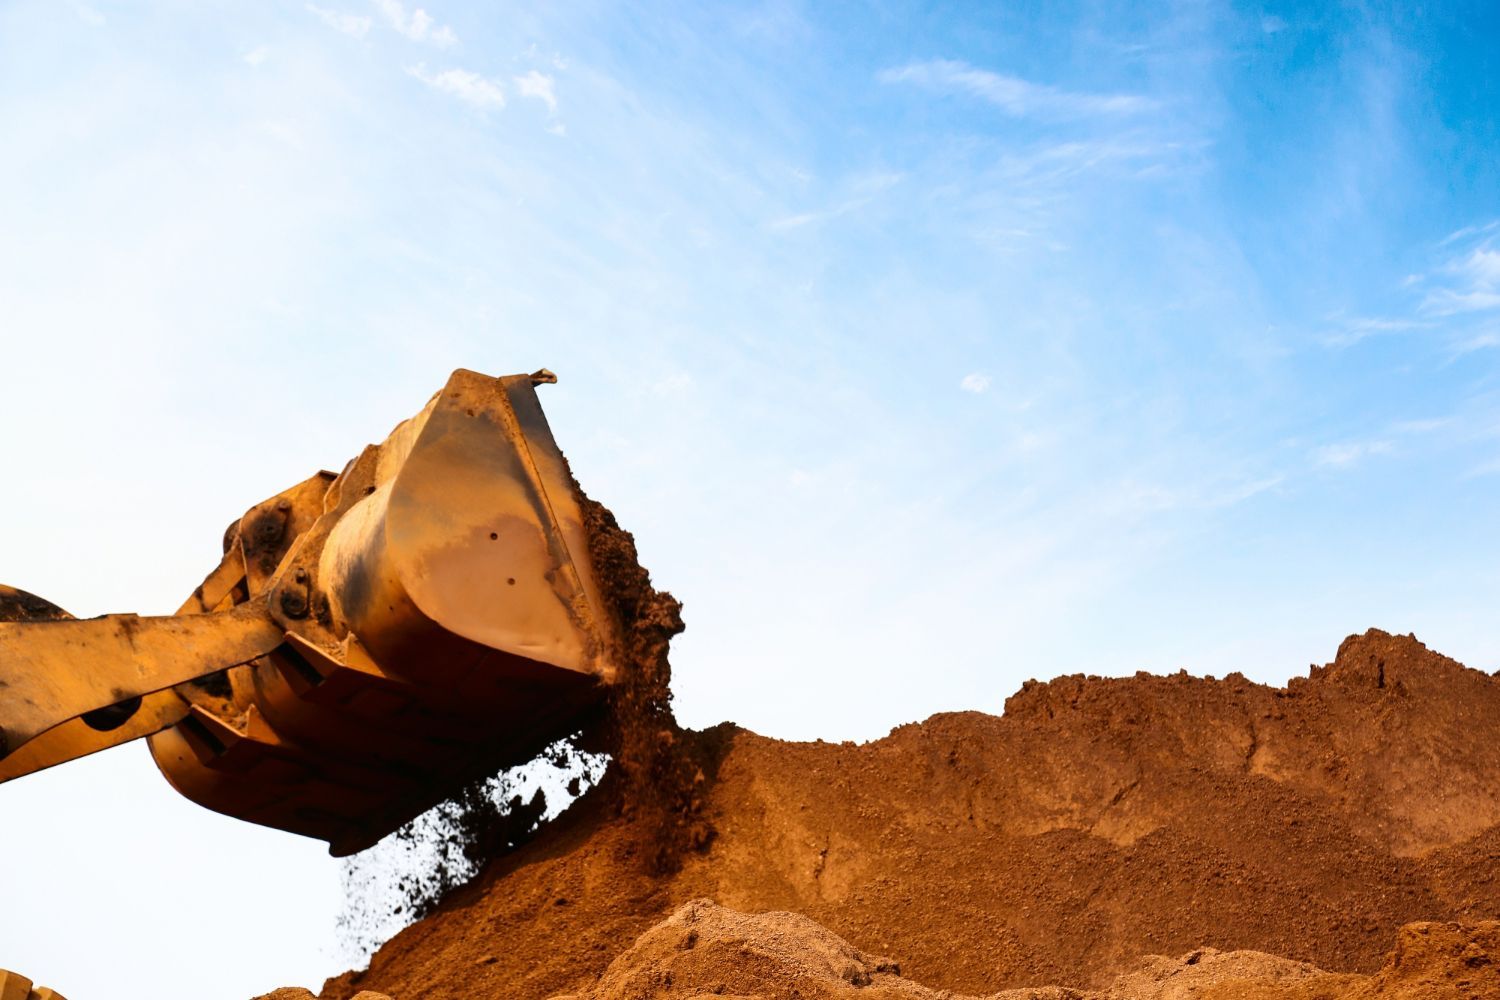 A bulldozer is scooping dirt from a pile of dirt.